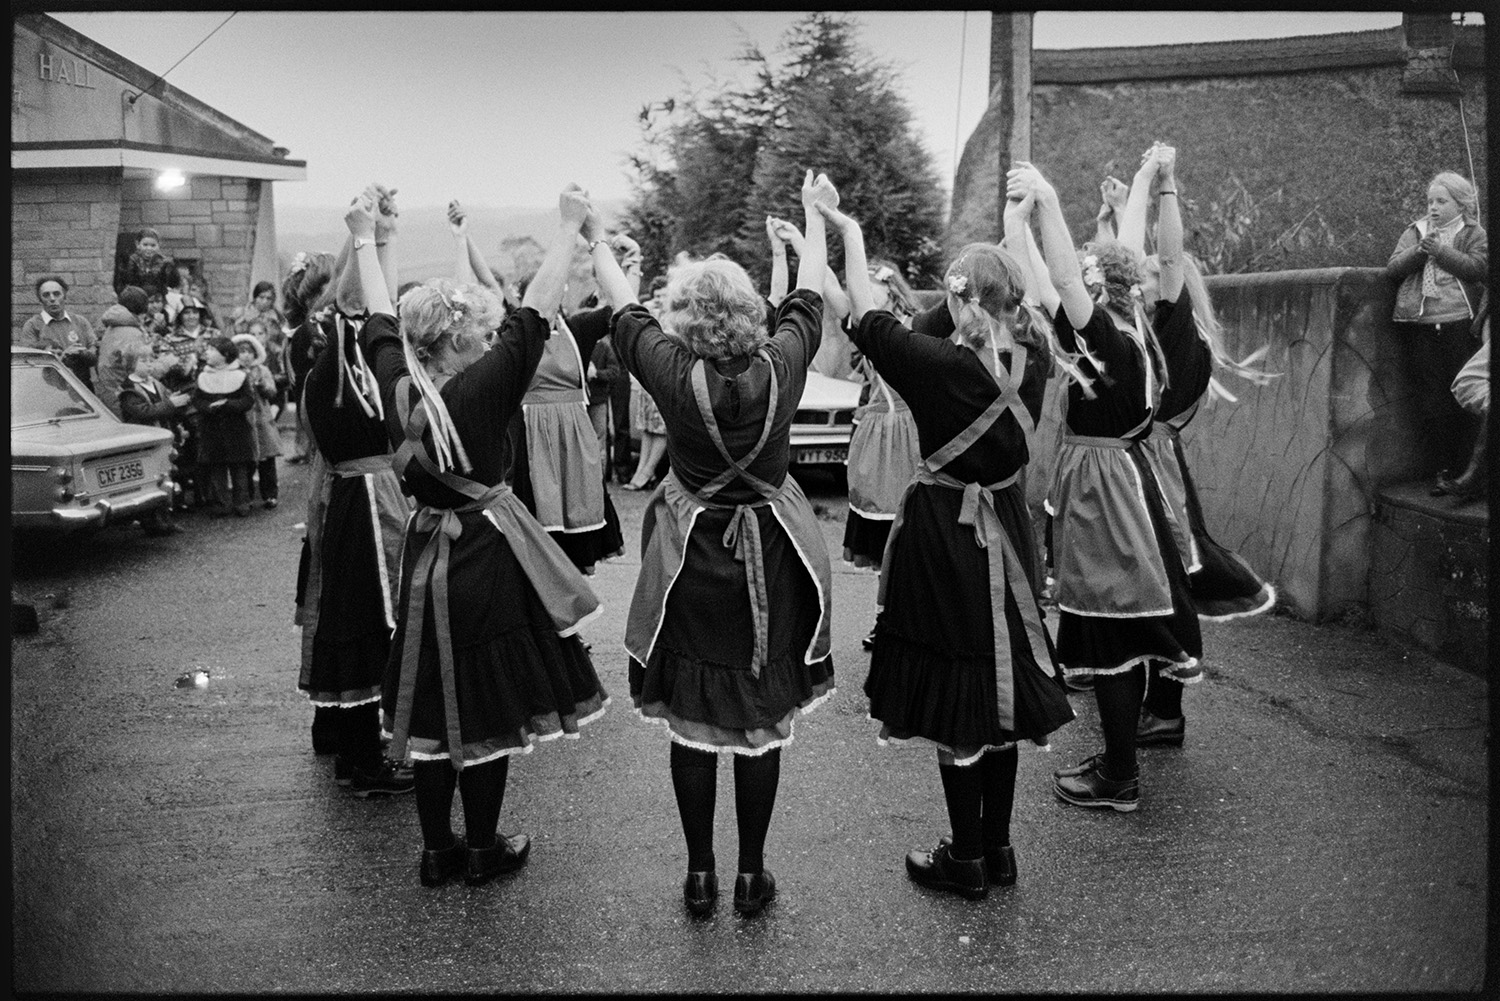 Women's Clog Dancing team at village carnival. 
[A group of women clog dancers performing in a circle outside Dolton Village Hall at Dolton Carnival. People are watching them.]